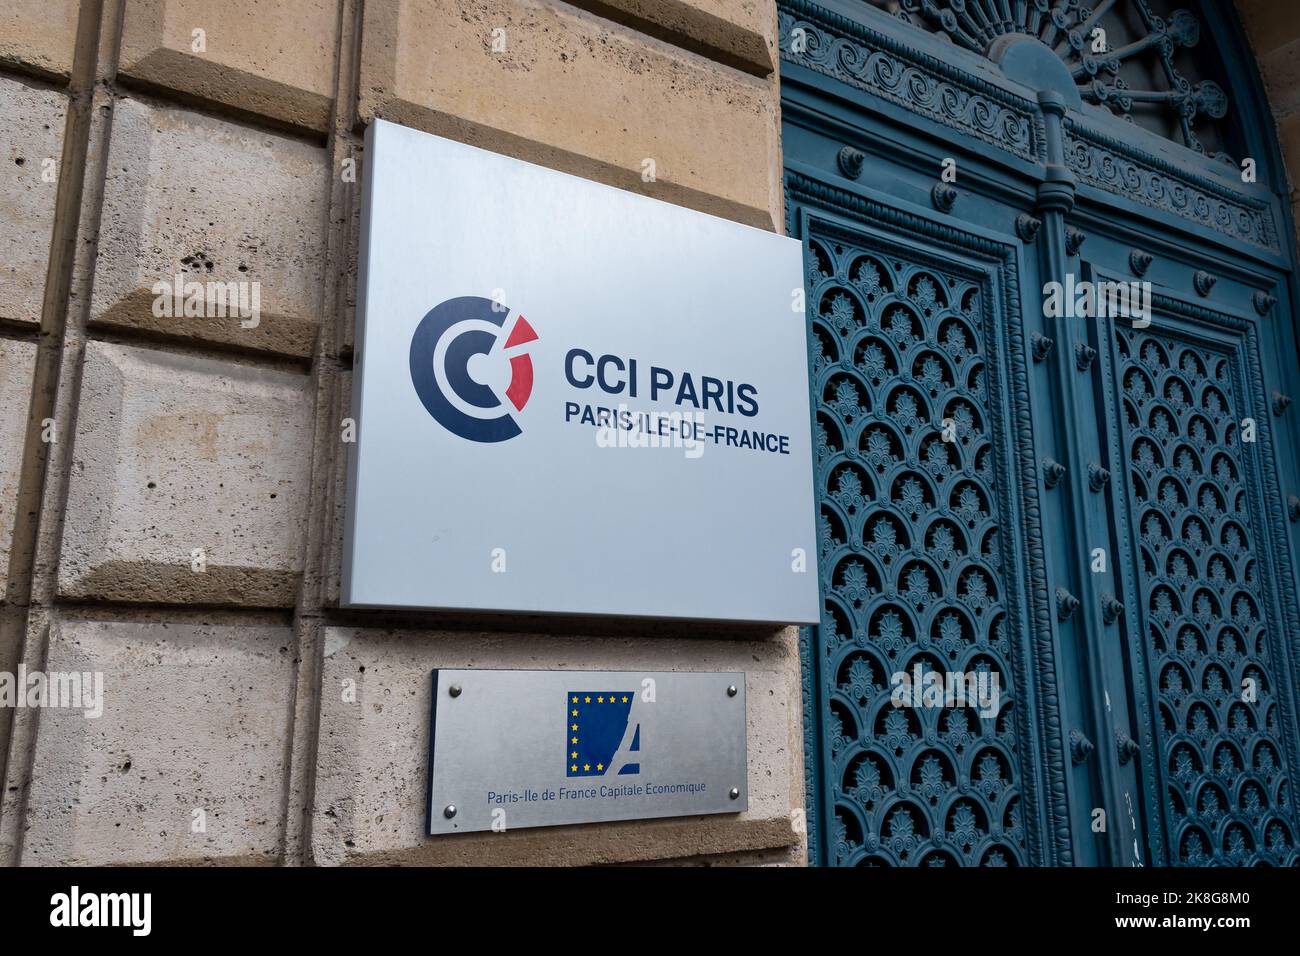 Sign with logo at the entrance to the Paris departmental headquarters of the Chamber of Commerce and Industry (CCI) of Paris Ile-de-France Stock Photo